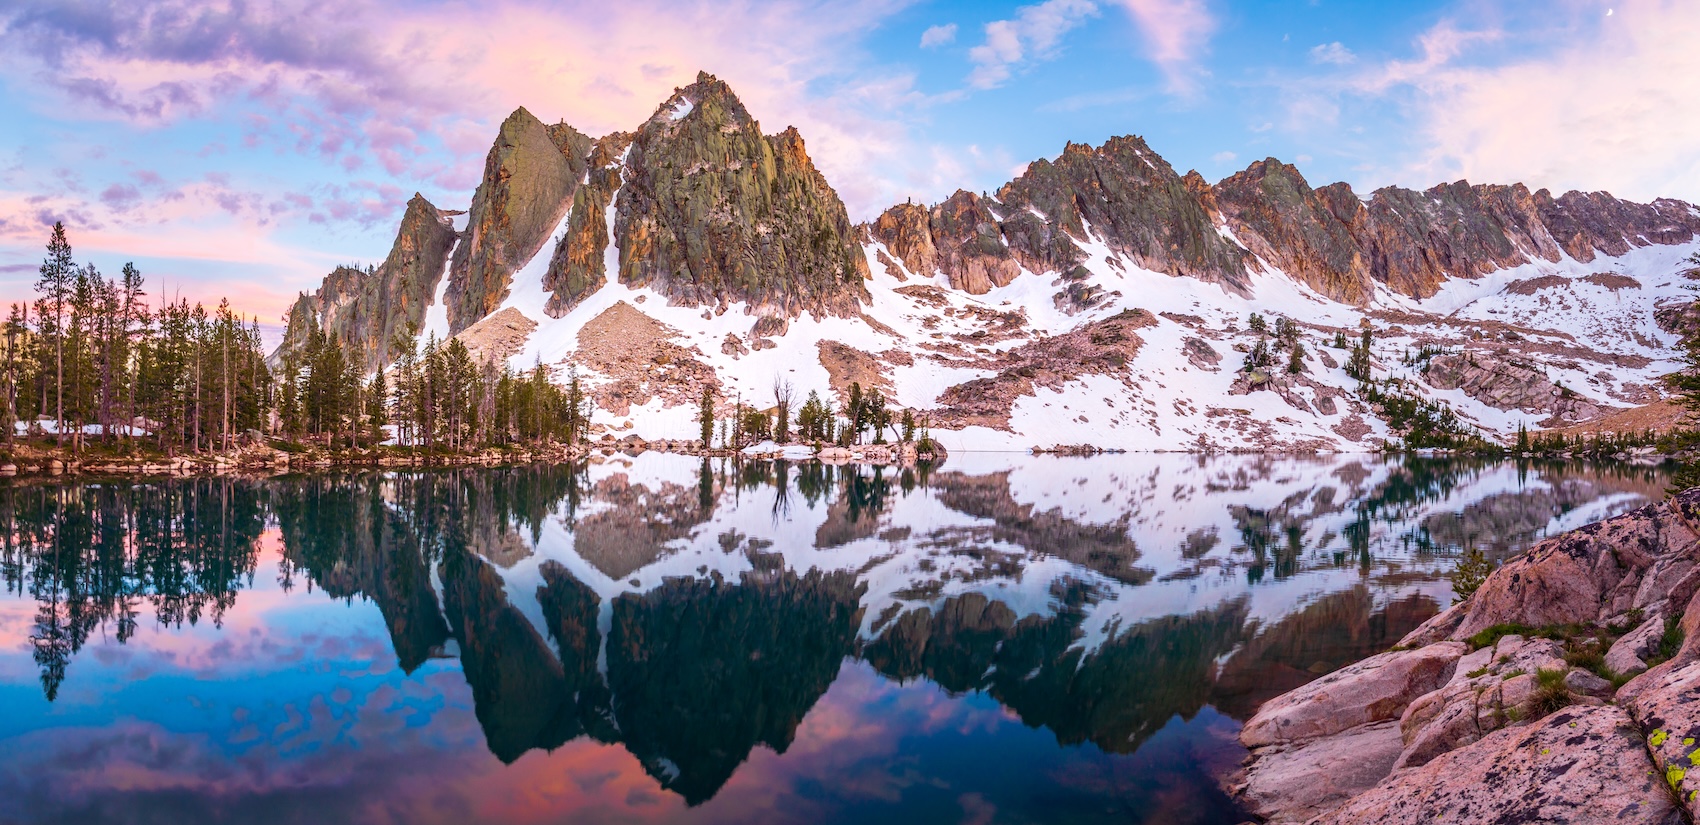 Lucille Lake in Idaho's Sawtooth Wilderness. Photo by Brock Dallman